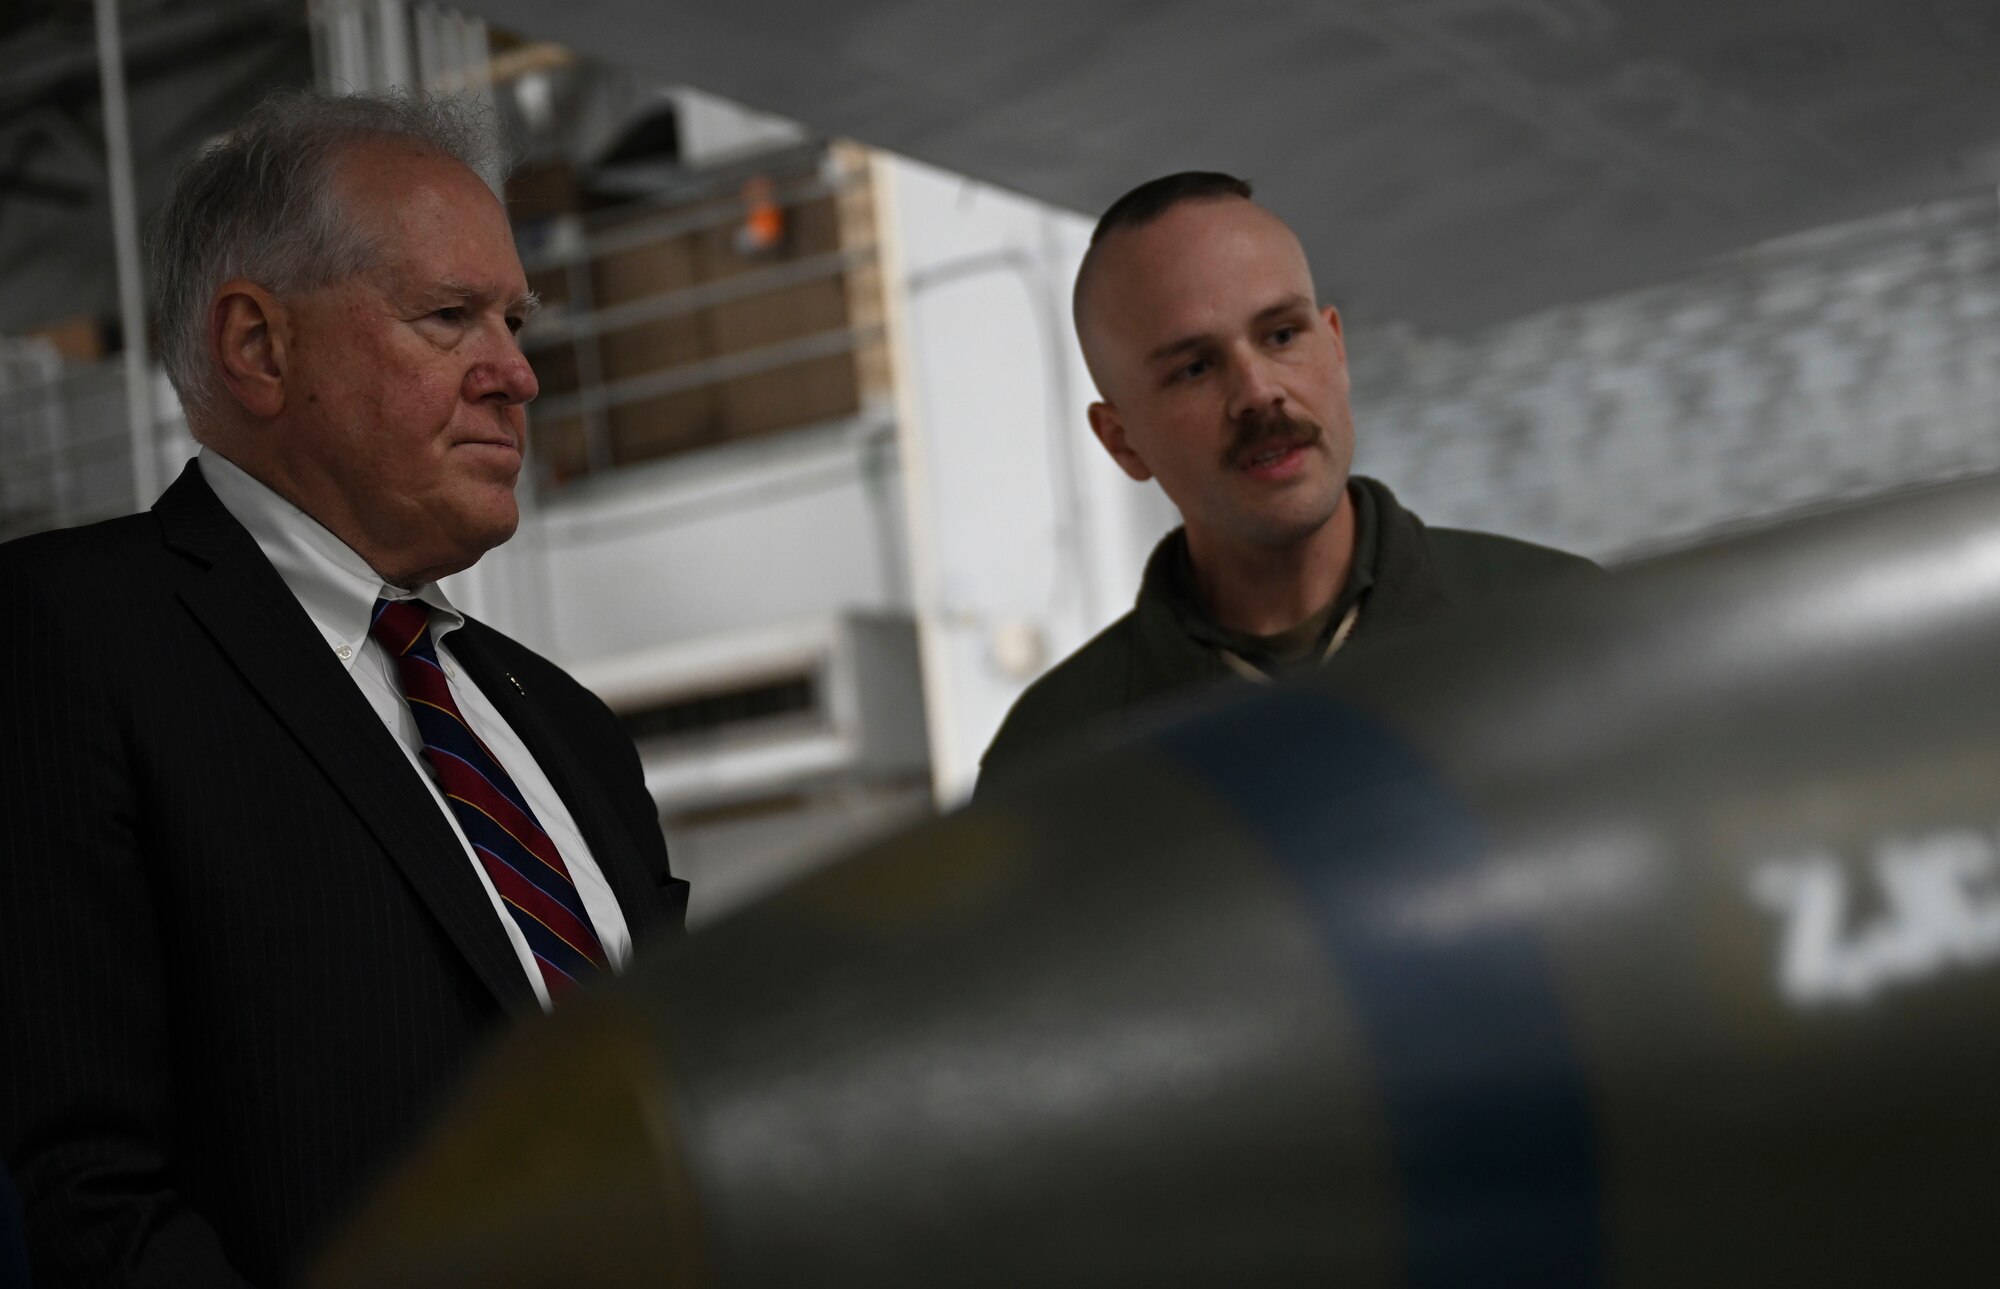 Secretary of the Air Force Frank Kendall is shown B-1B Lancer compatible munitions at Ellsworth Air Force Base, S.D., Oct. 27, 2022. The B-1 can rapidly deliver massive quantities of precision and non-precision munitions to combat any adversary, anywhere in the world, at any time. (U.S. Air Force photo by Airman Yendi Borjas)